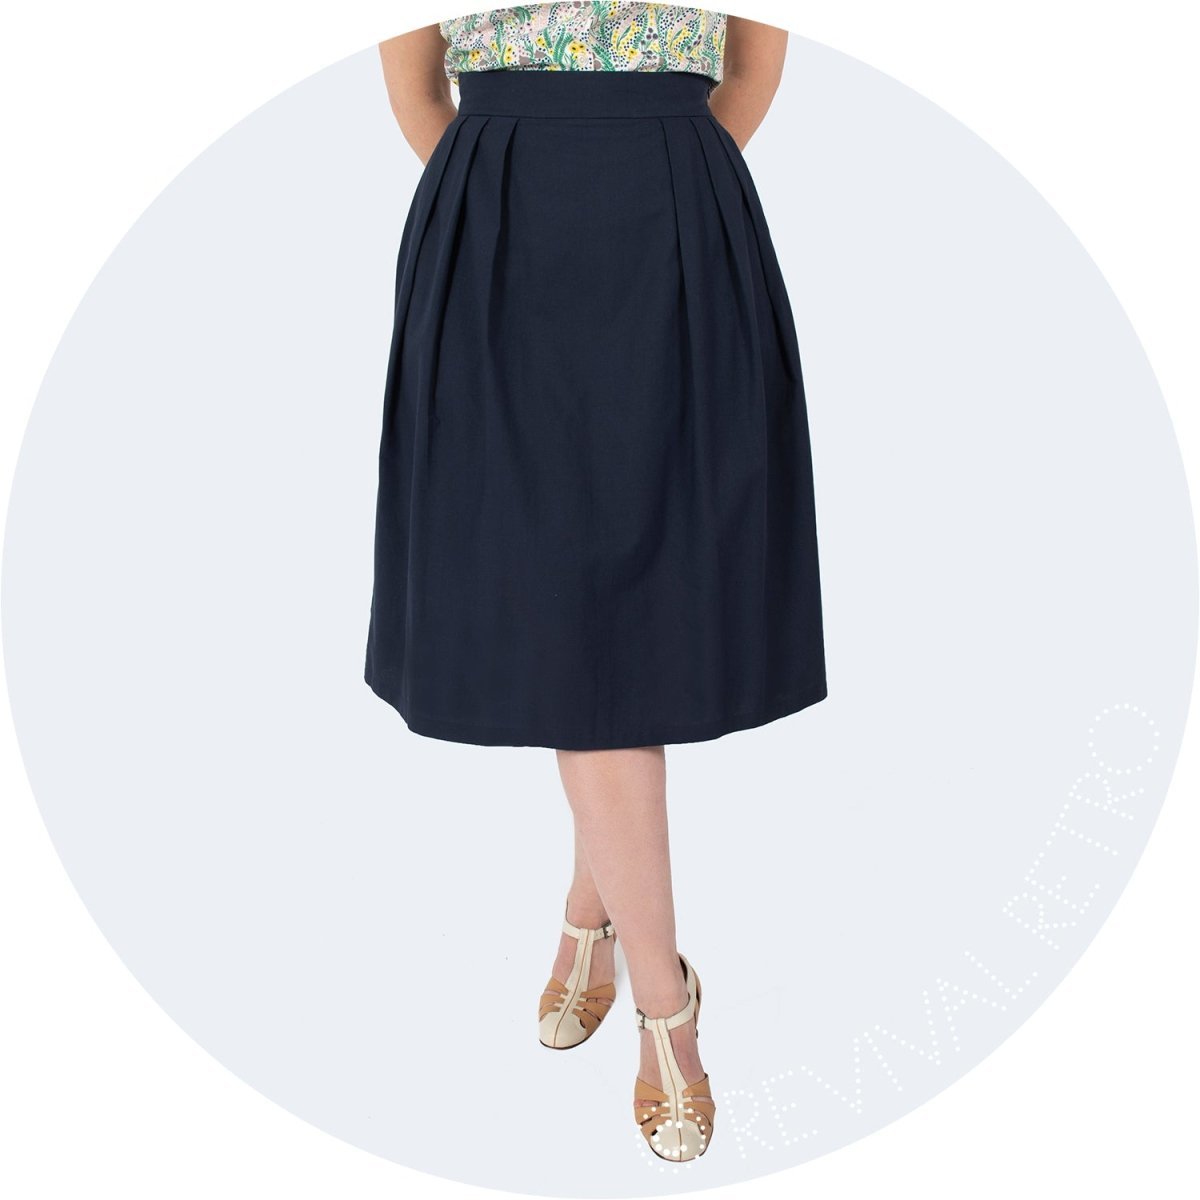 Organic cotton A-line skirt in navy with deep pleats at the sides.